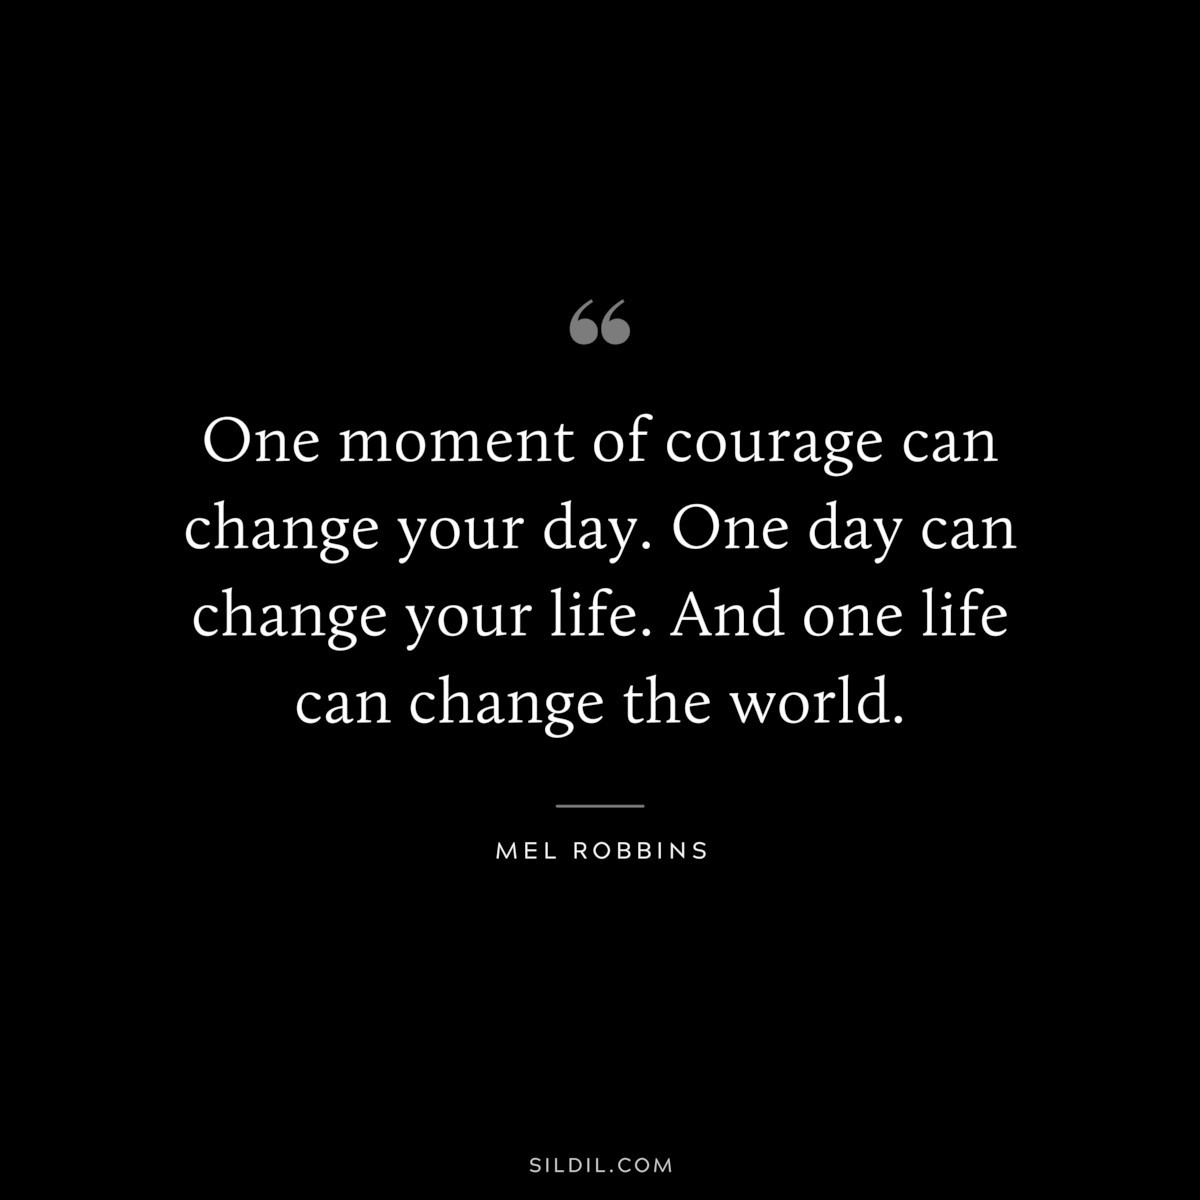 One moment of courage can change your day. One day can change your life. And one life can change the world. ― Mel Robbins